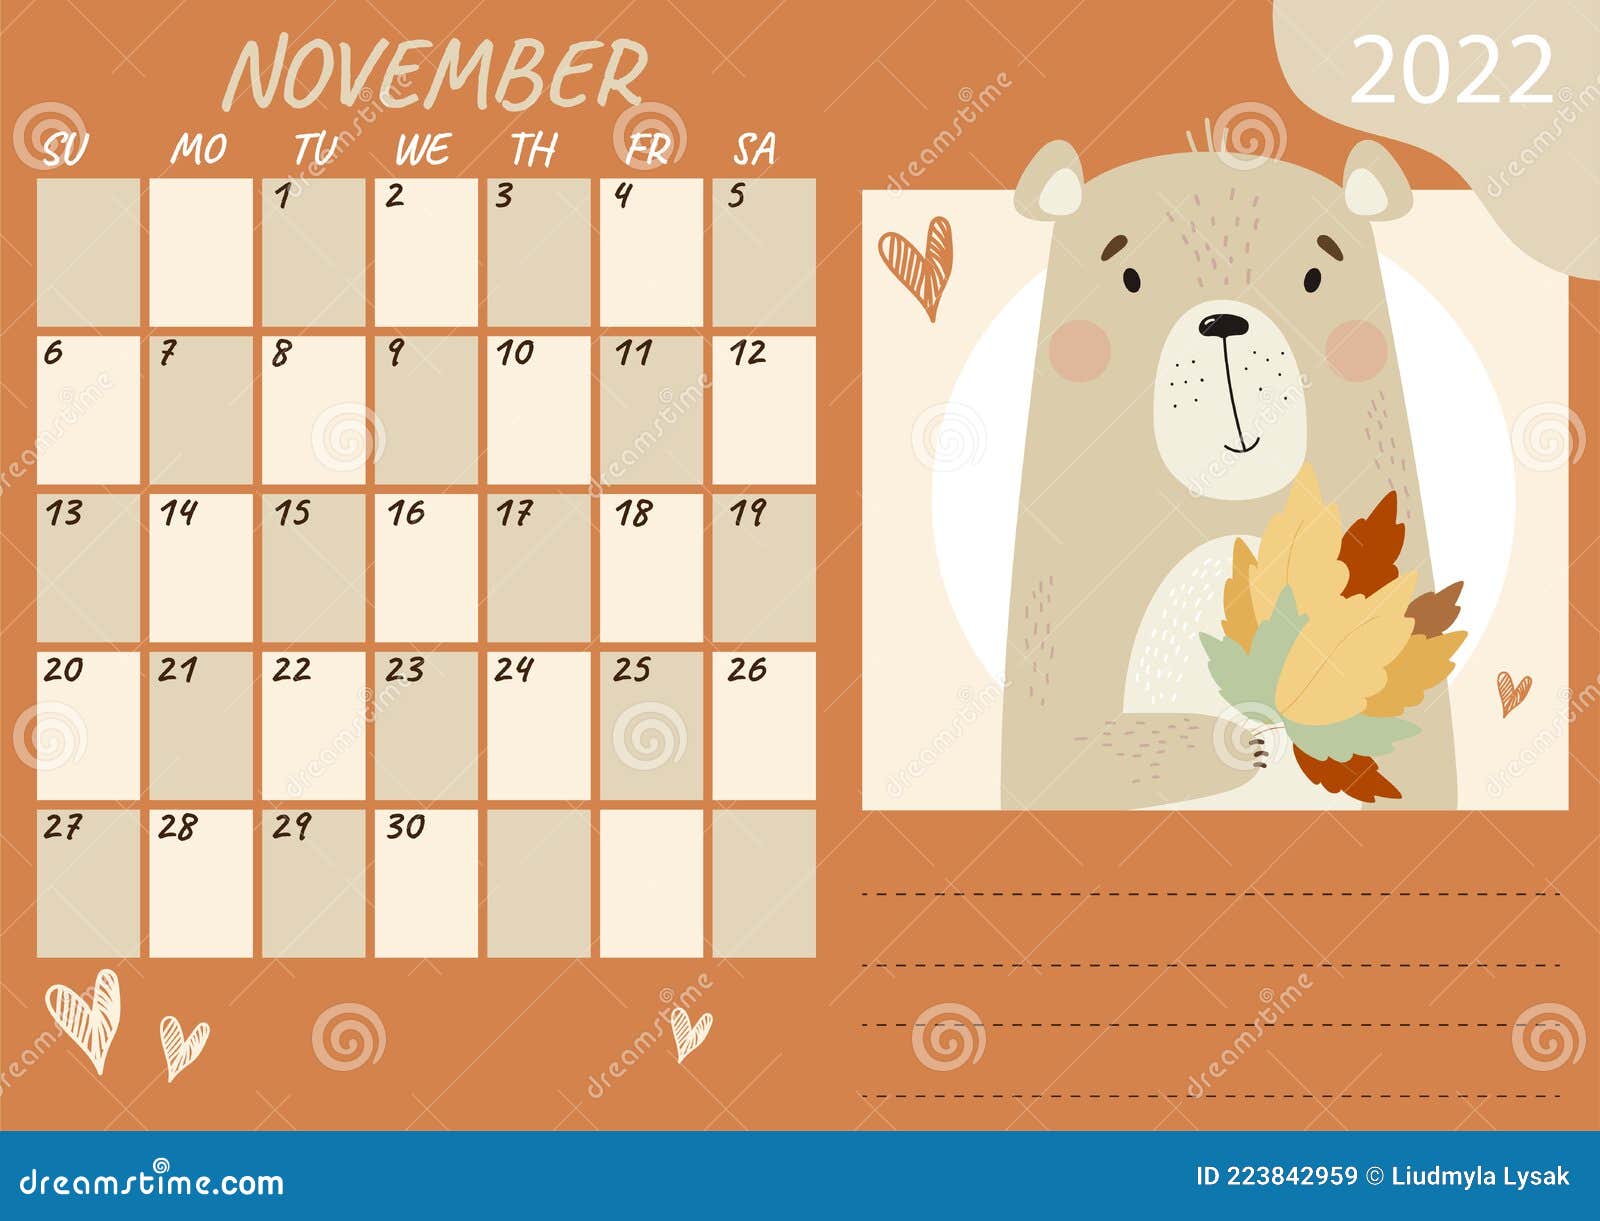 November 2022 Calendar Printable Cute Planner Calendar Template For November 2022. Cute Teddy Bear With A Bouquet  Of Autumn Leaves. Vector Illustration. Week From Stock Vector -  Illustration Of Kids, Collection: 223842959